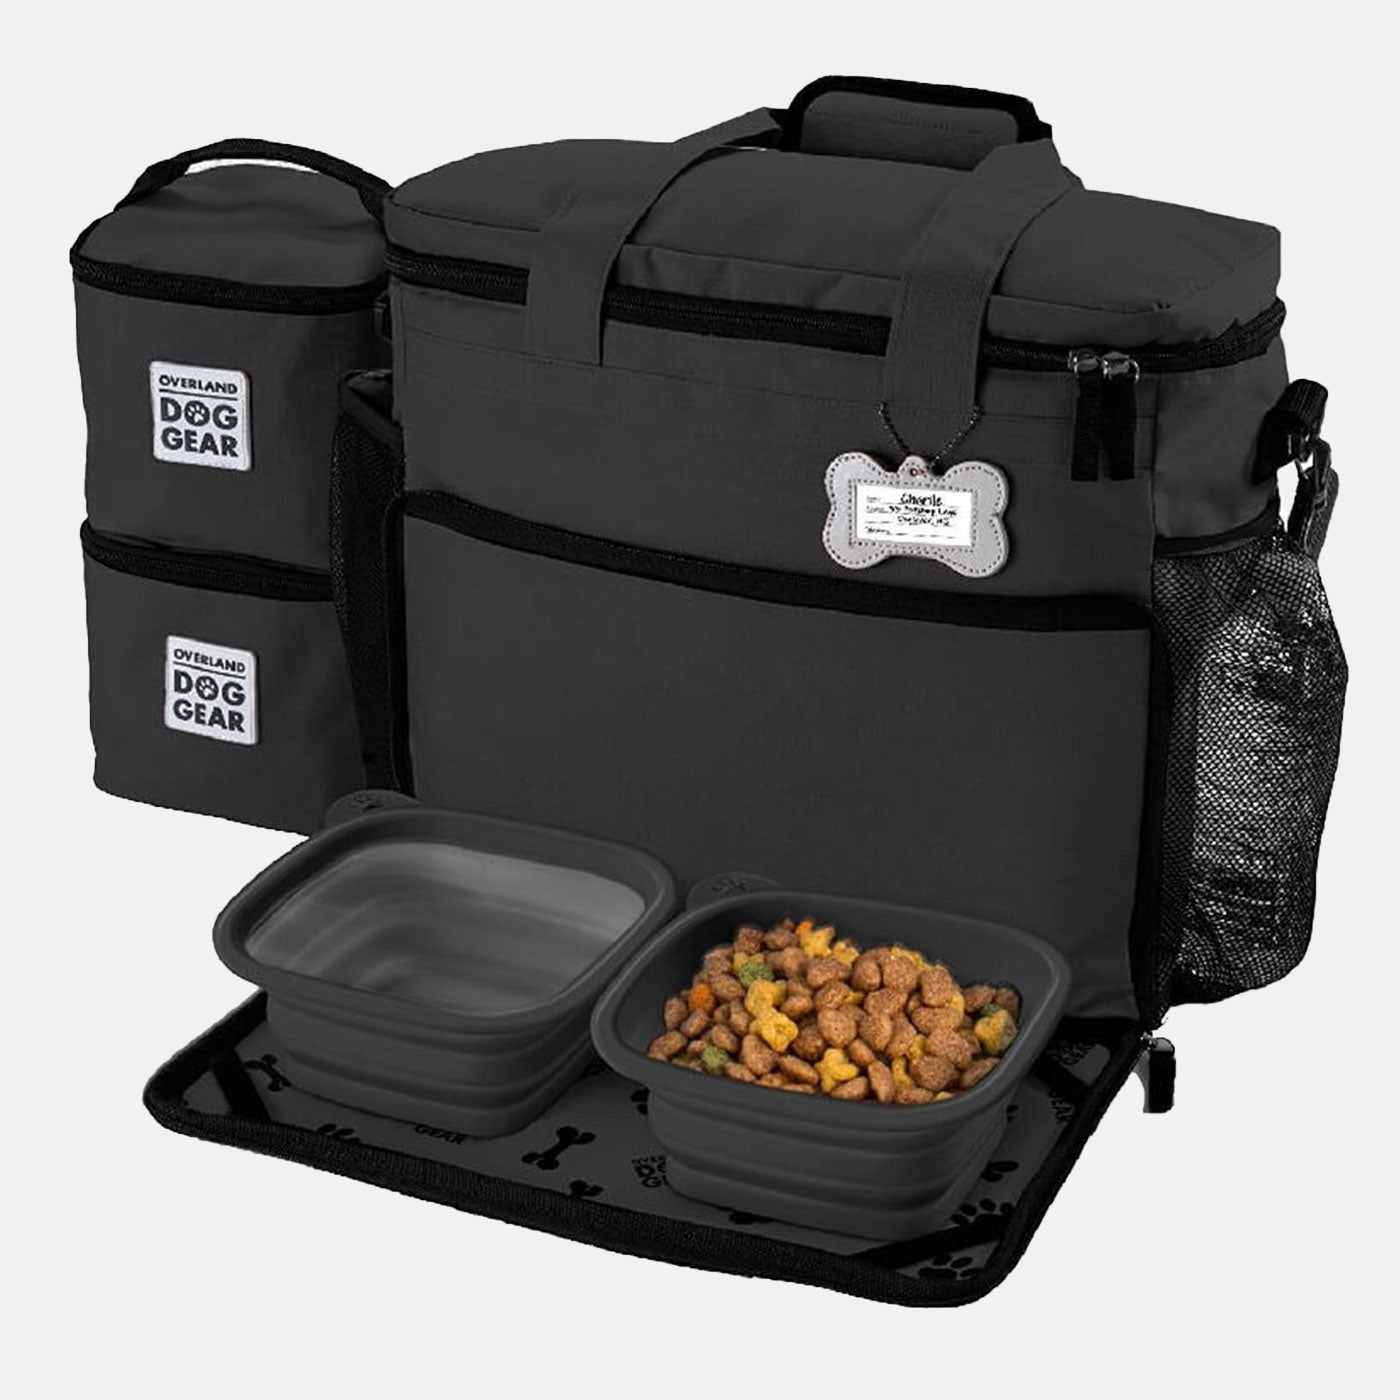 Discover, Mobile Dog Gear Week Away Bag, in Black. The Perfect Away Bag for any Pet Parent, Featuring dividers to stack food and built in waste bag dispenser. Also Included feeding set, collapsible silicone bowls and placemat! The Perfect Gift For travel, meets airline requirements. Available Now at Lords & Labradors